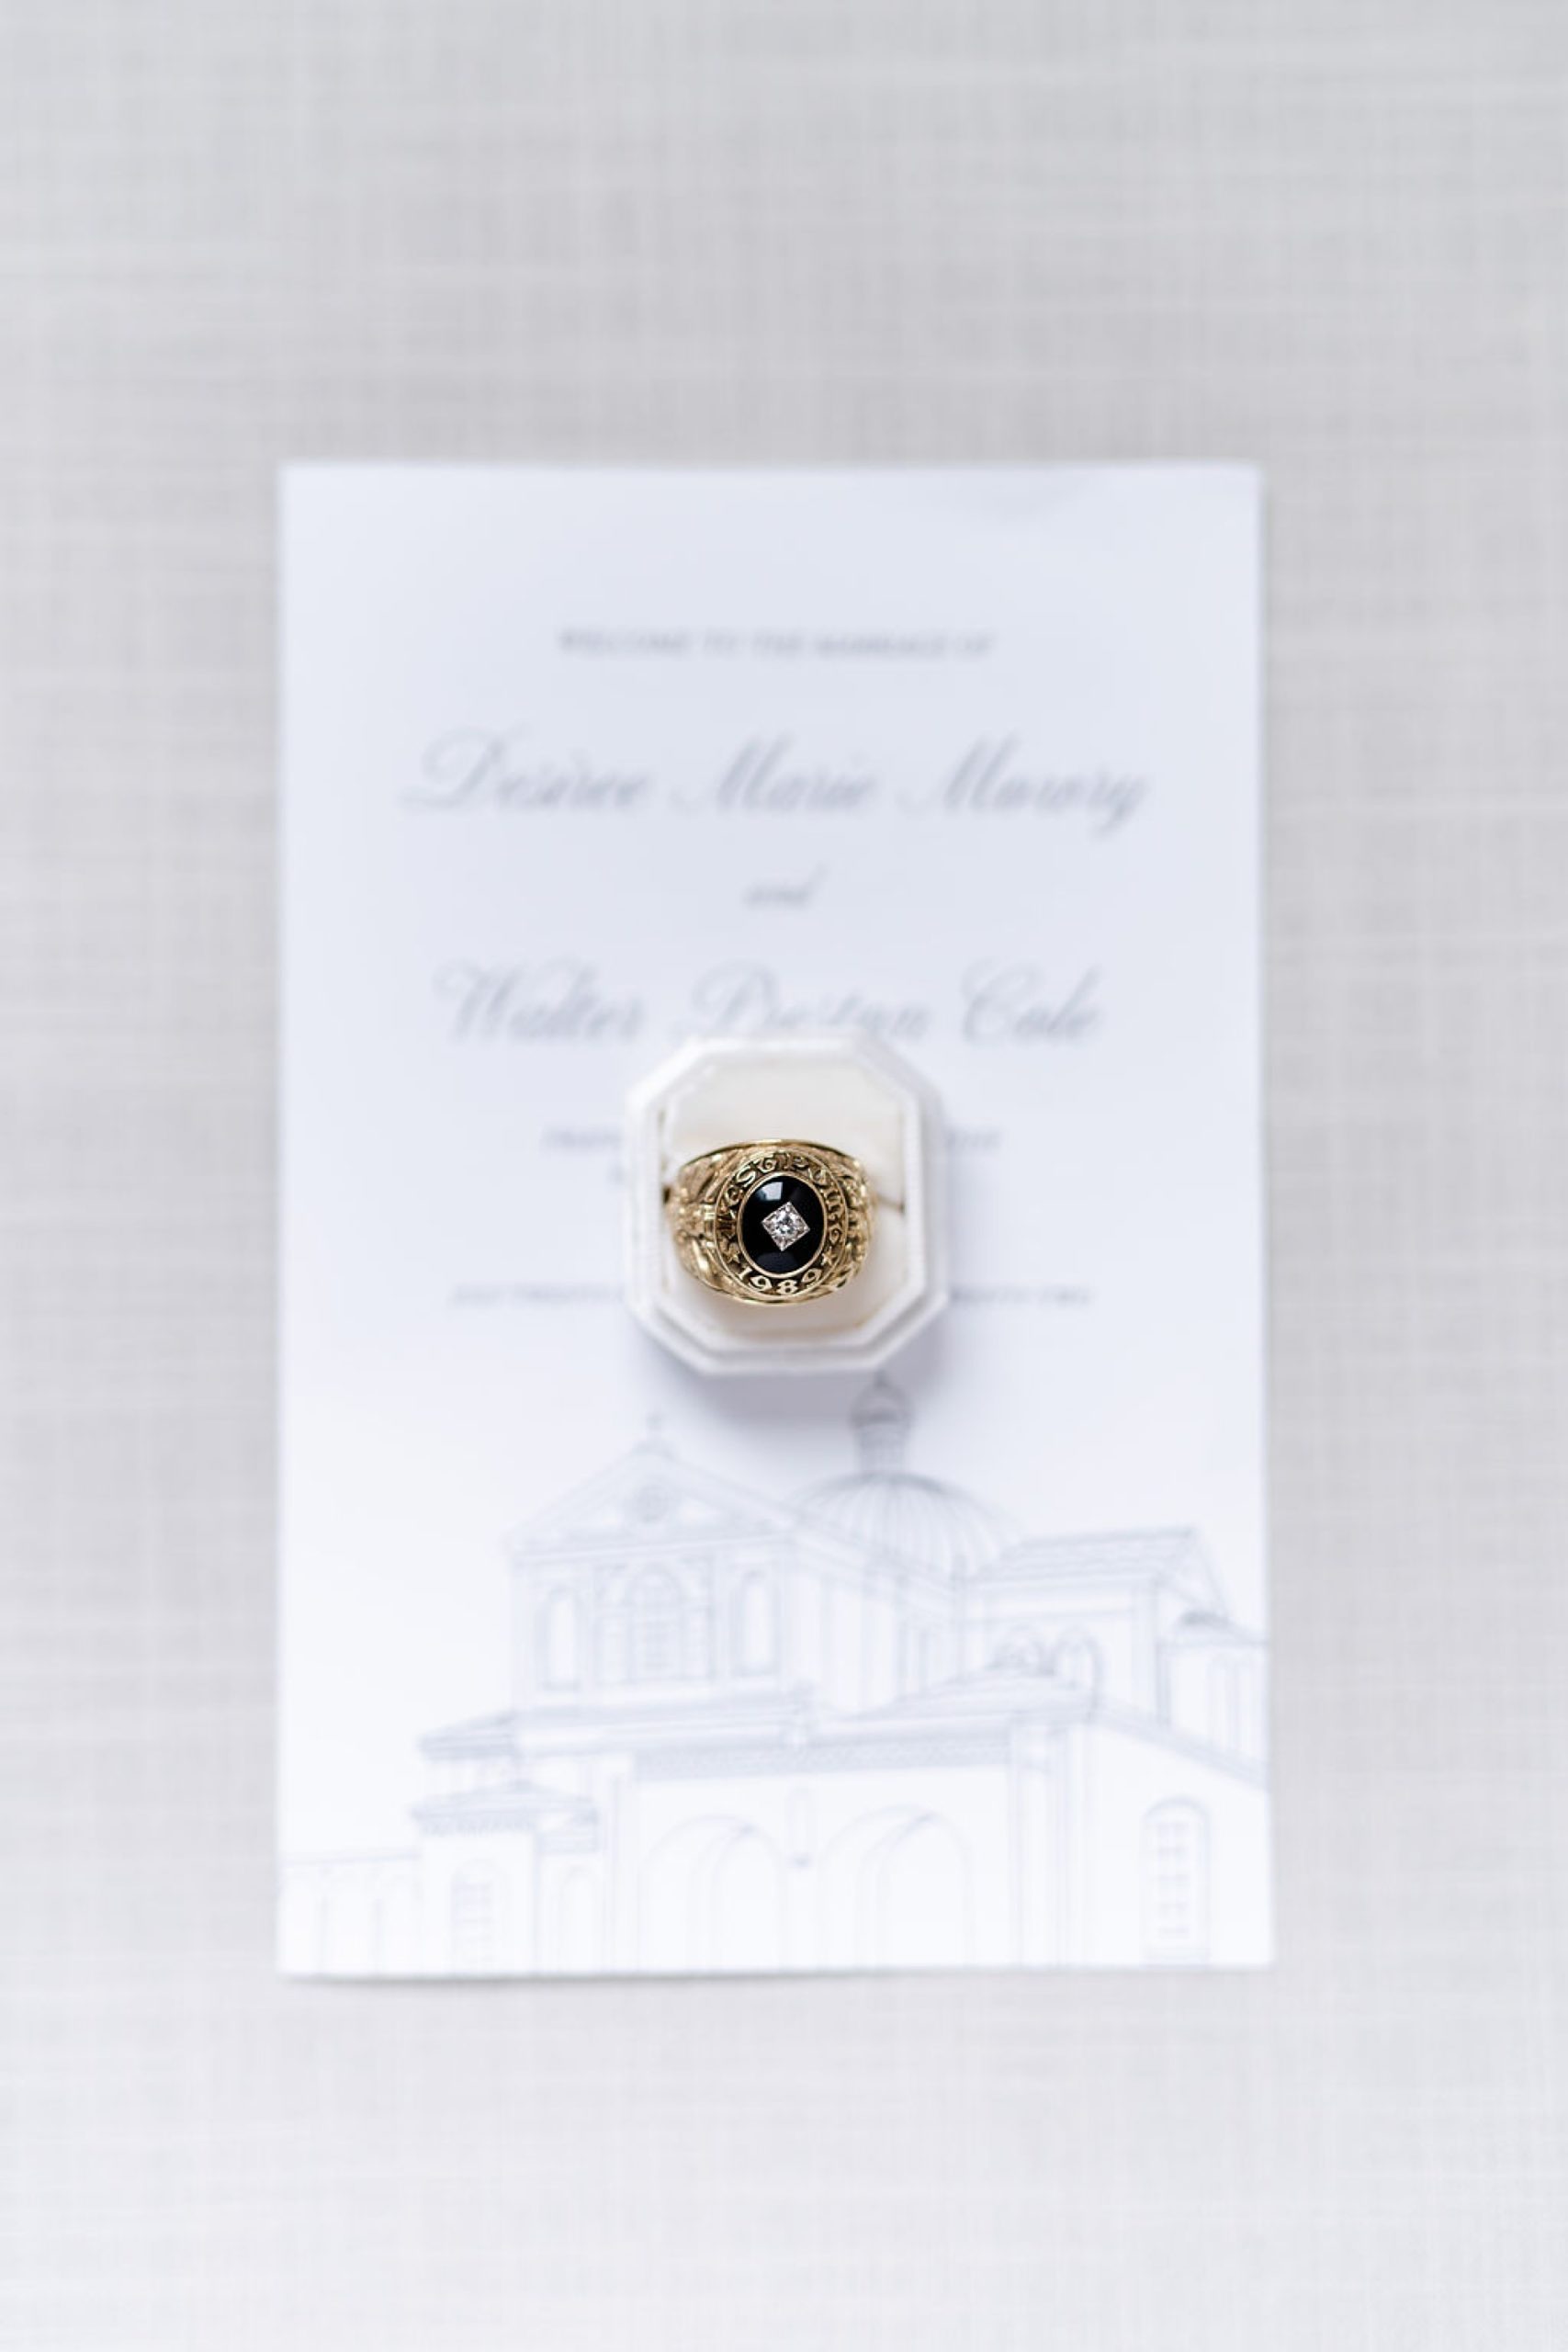 groom's military ring rests on invitation for DC wedding